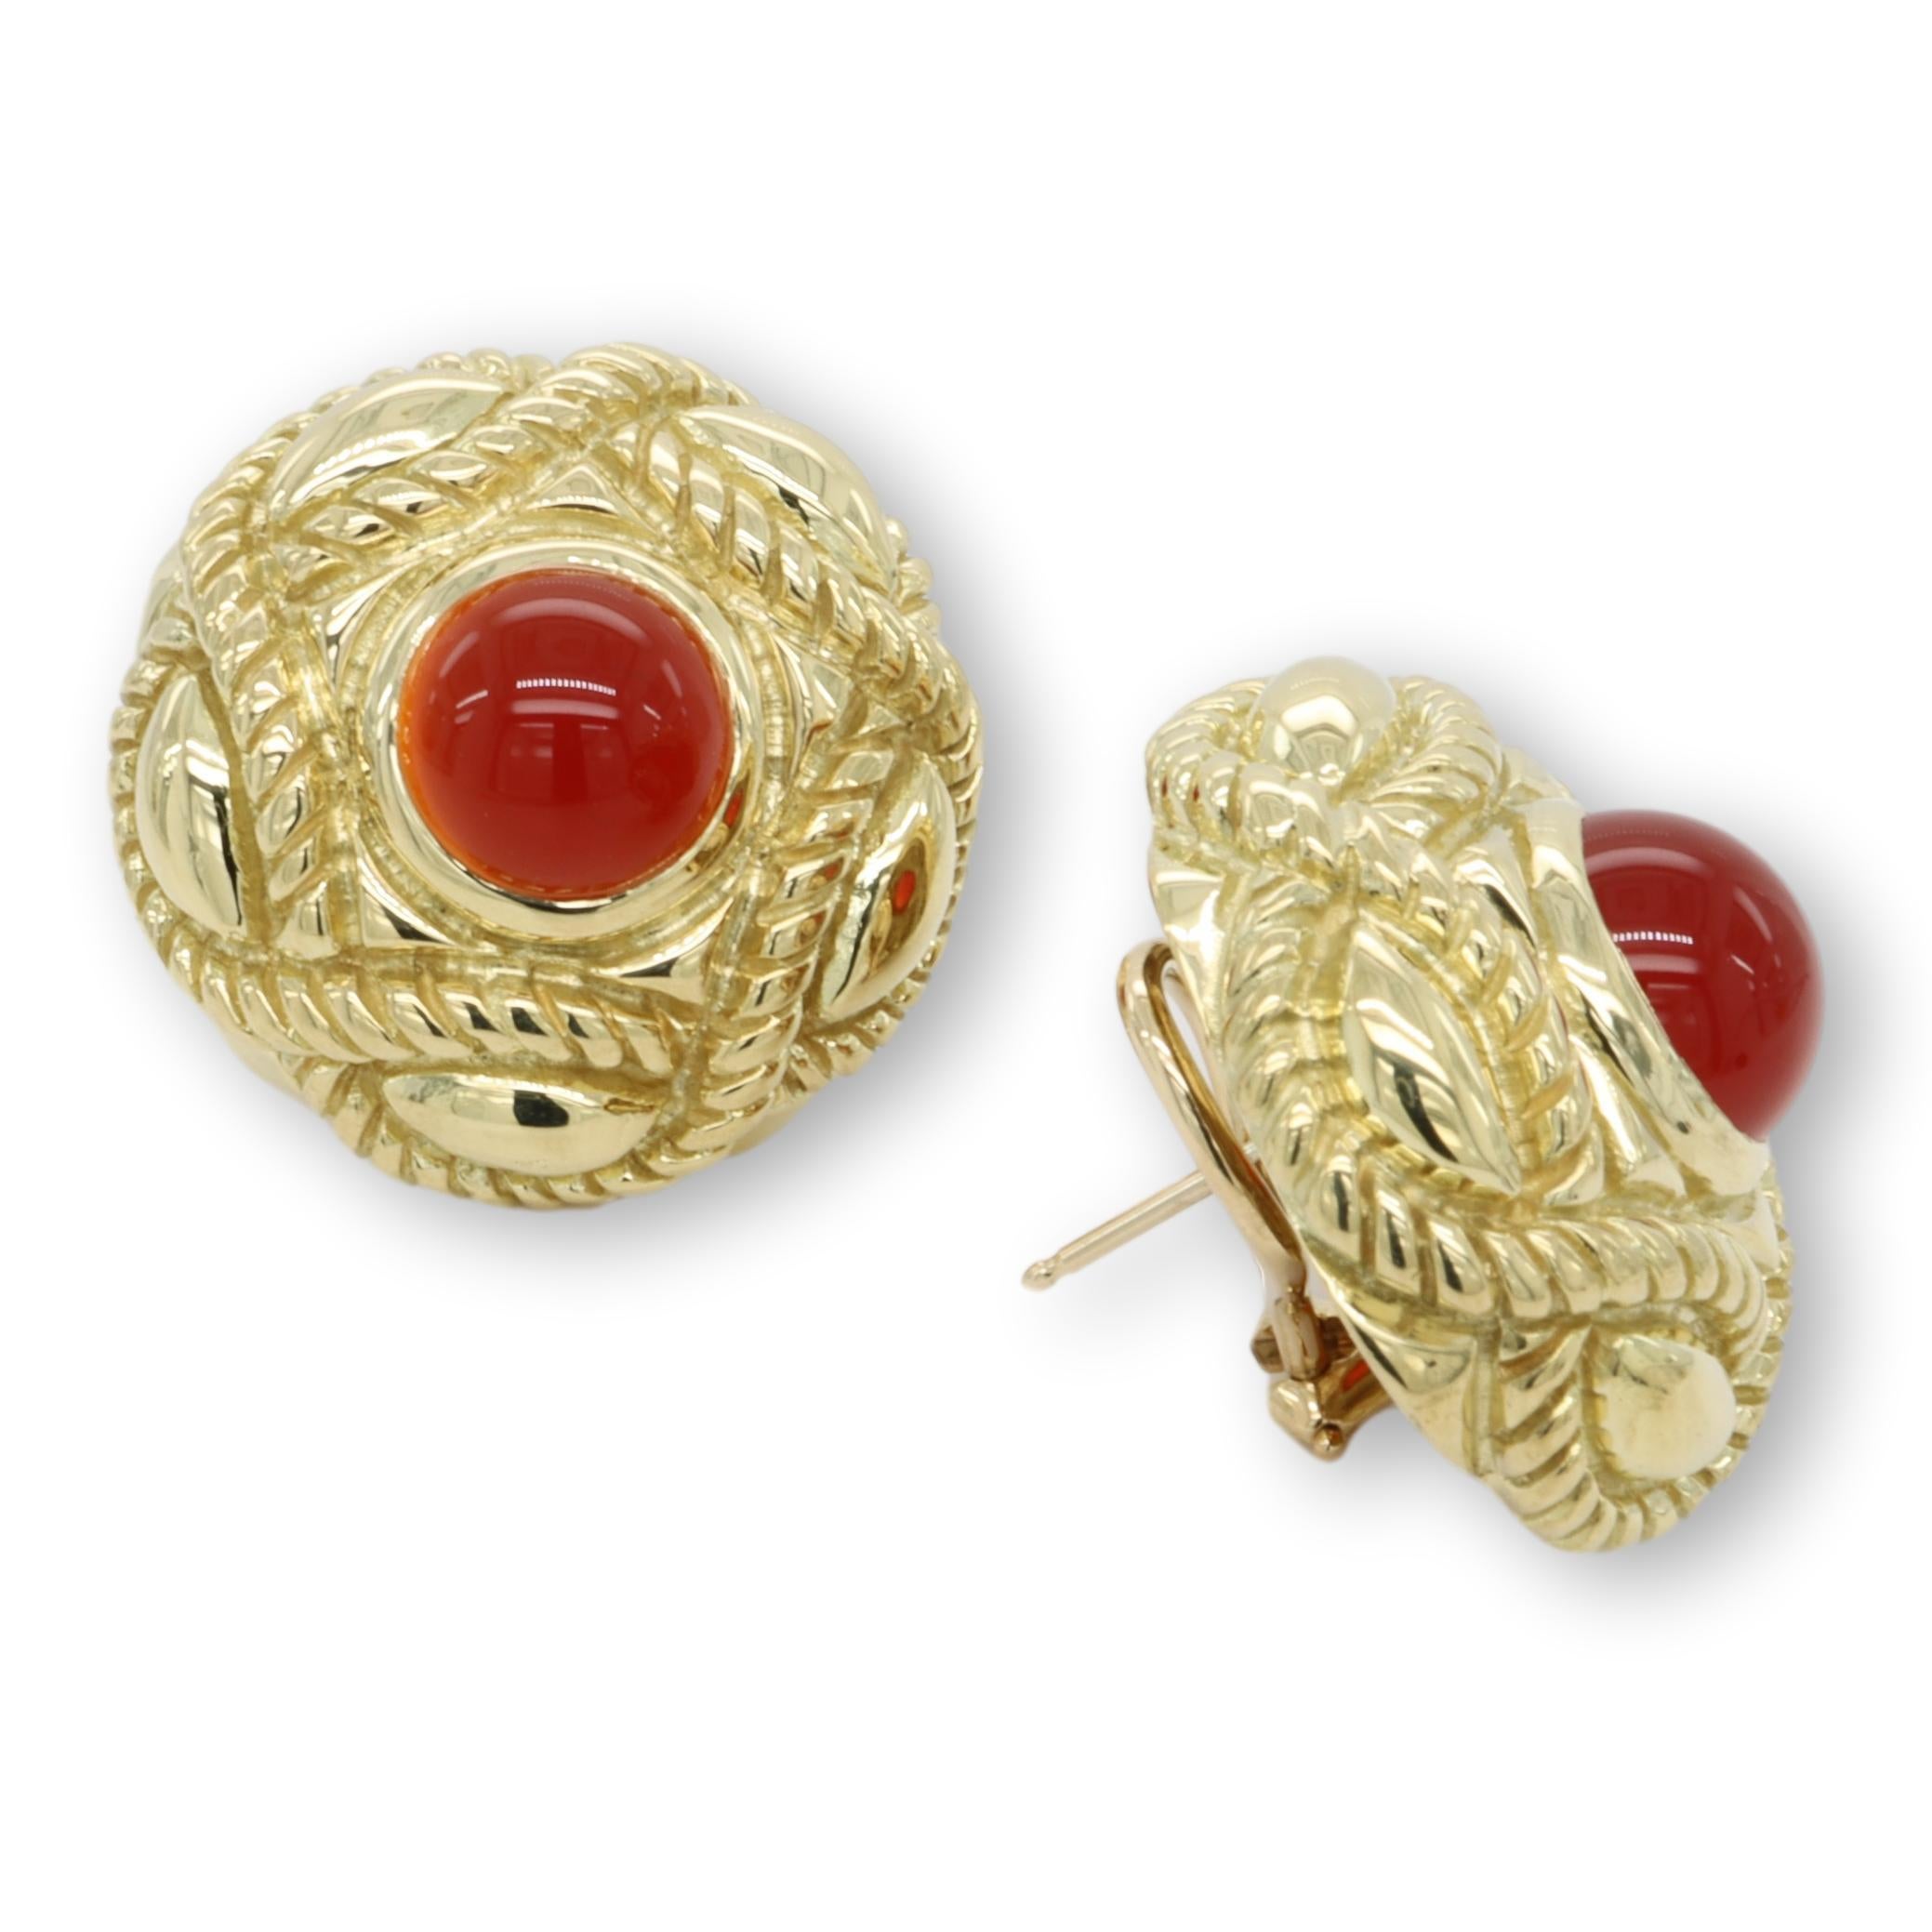 Pair of Vintage J.J. Marco earrings finely crafted in 18 karat yellow gold with 2 cabochon red cornelian centers measuring 9 mm x 9 mm inside a twisted rope design circle earring with large omega backs and posts. Earring measures 25 mm. Fully